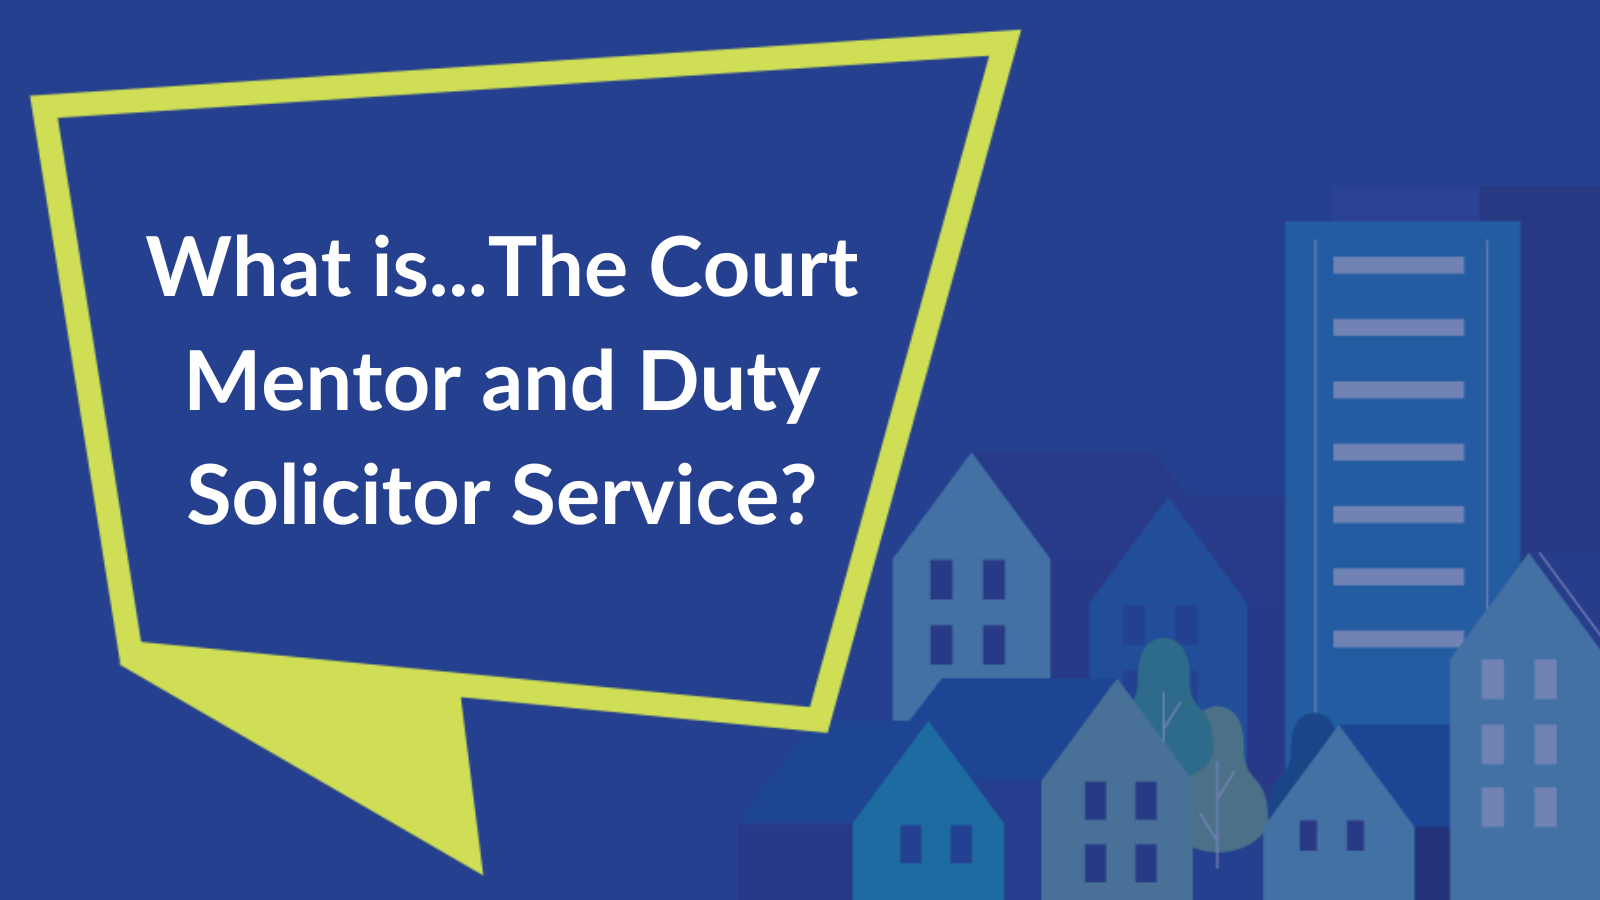 Cover image for blog post. Text reads "What is the Court Mentor and the Duty Solicitor Service?".